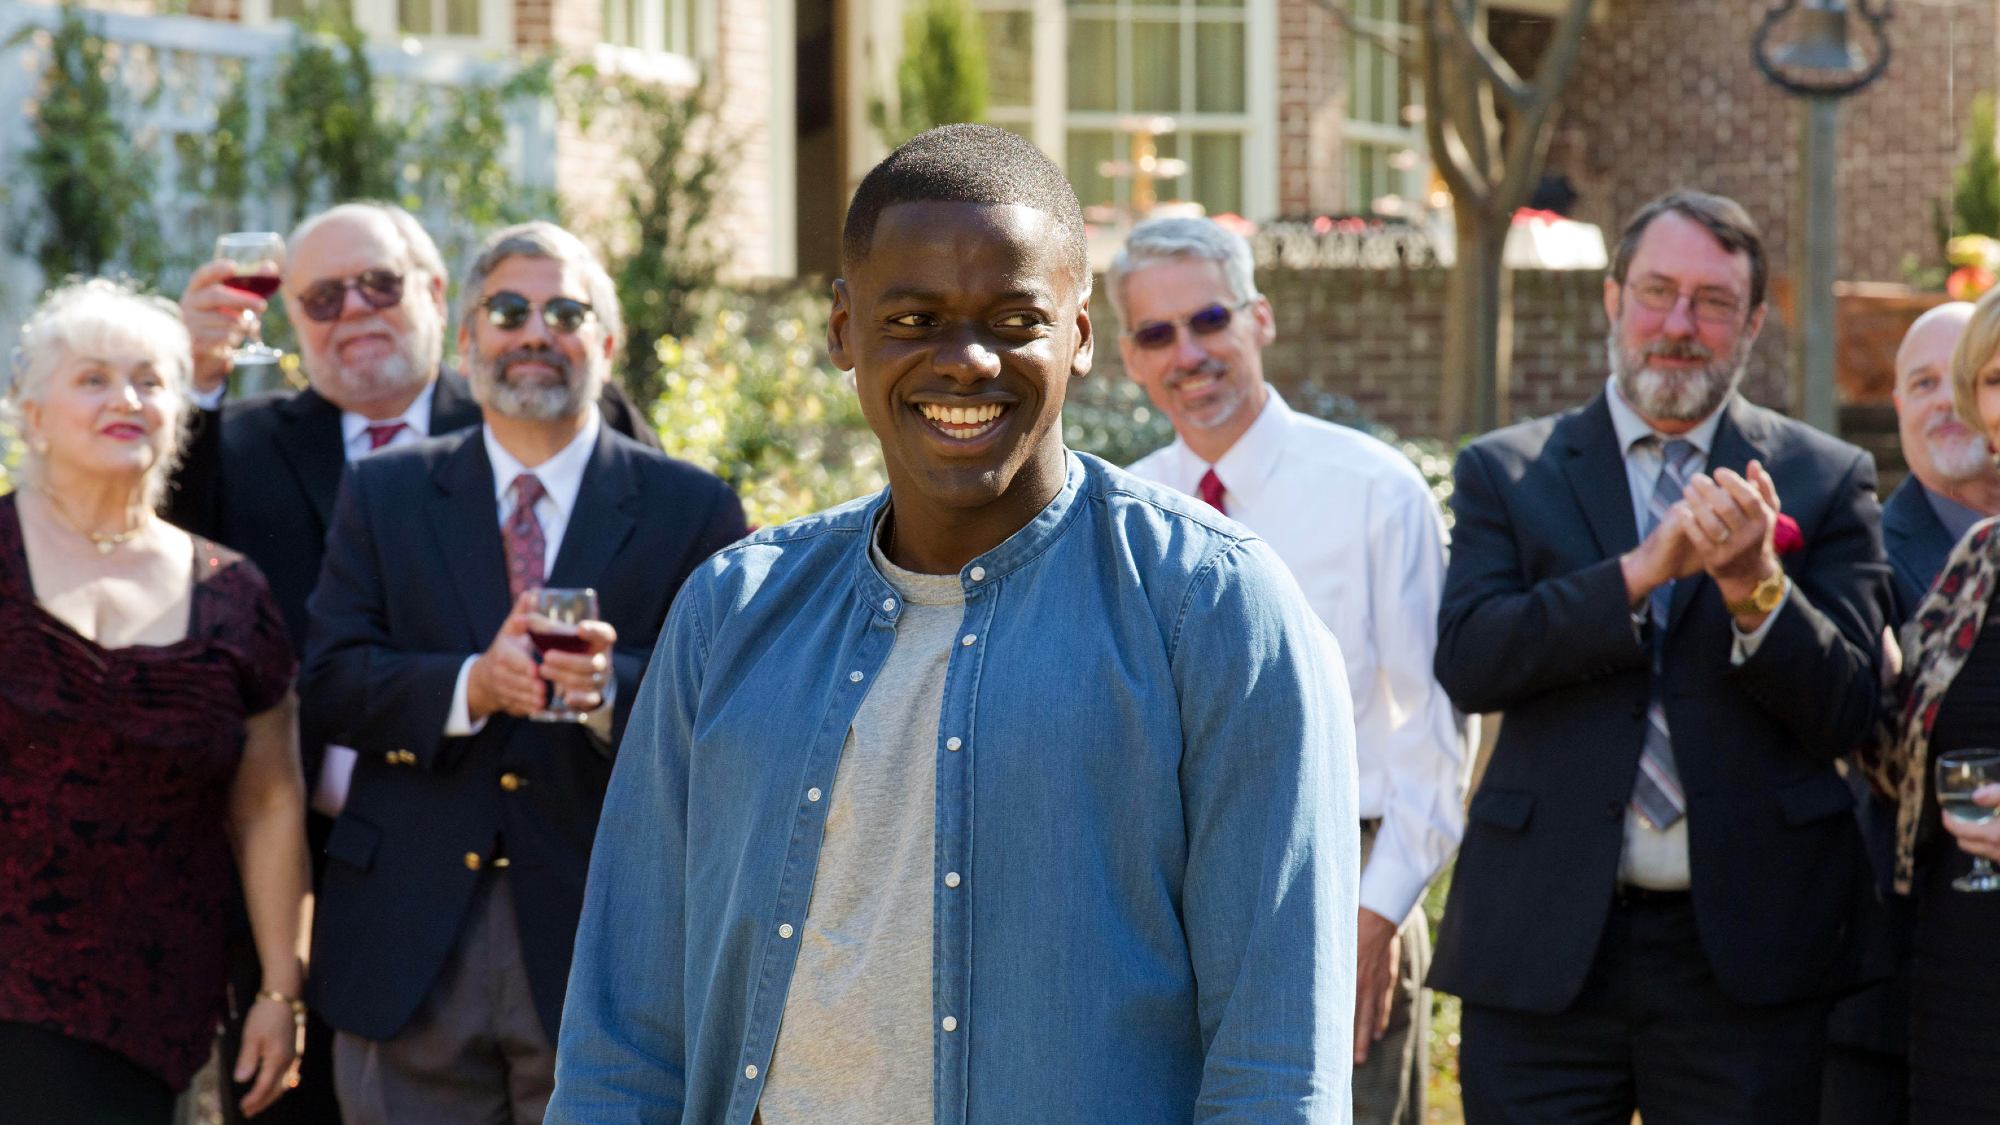 Daniel Kaluuya stands in front of a crowd in Get Out